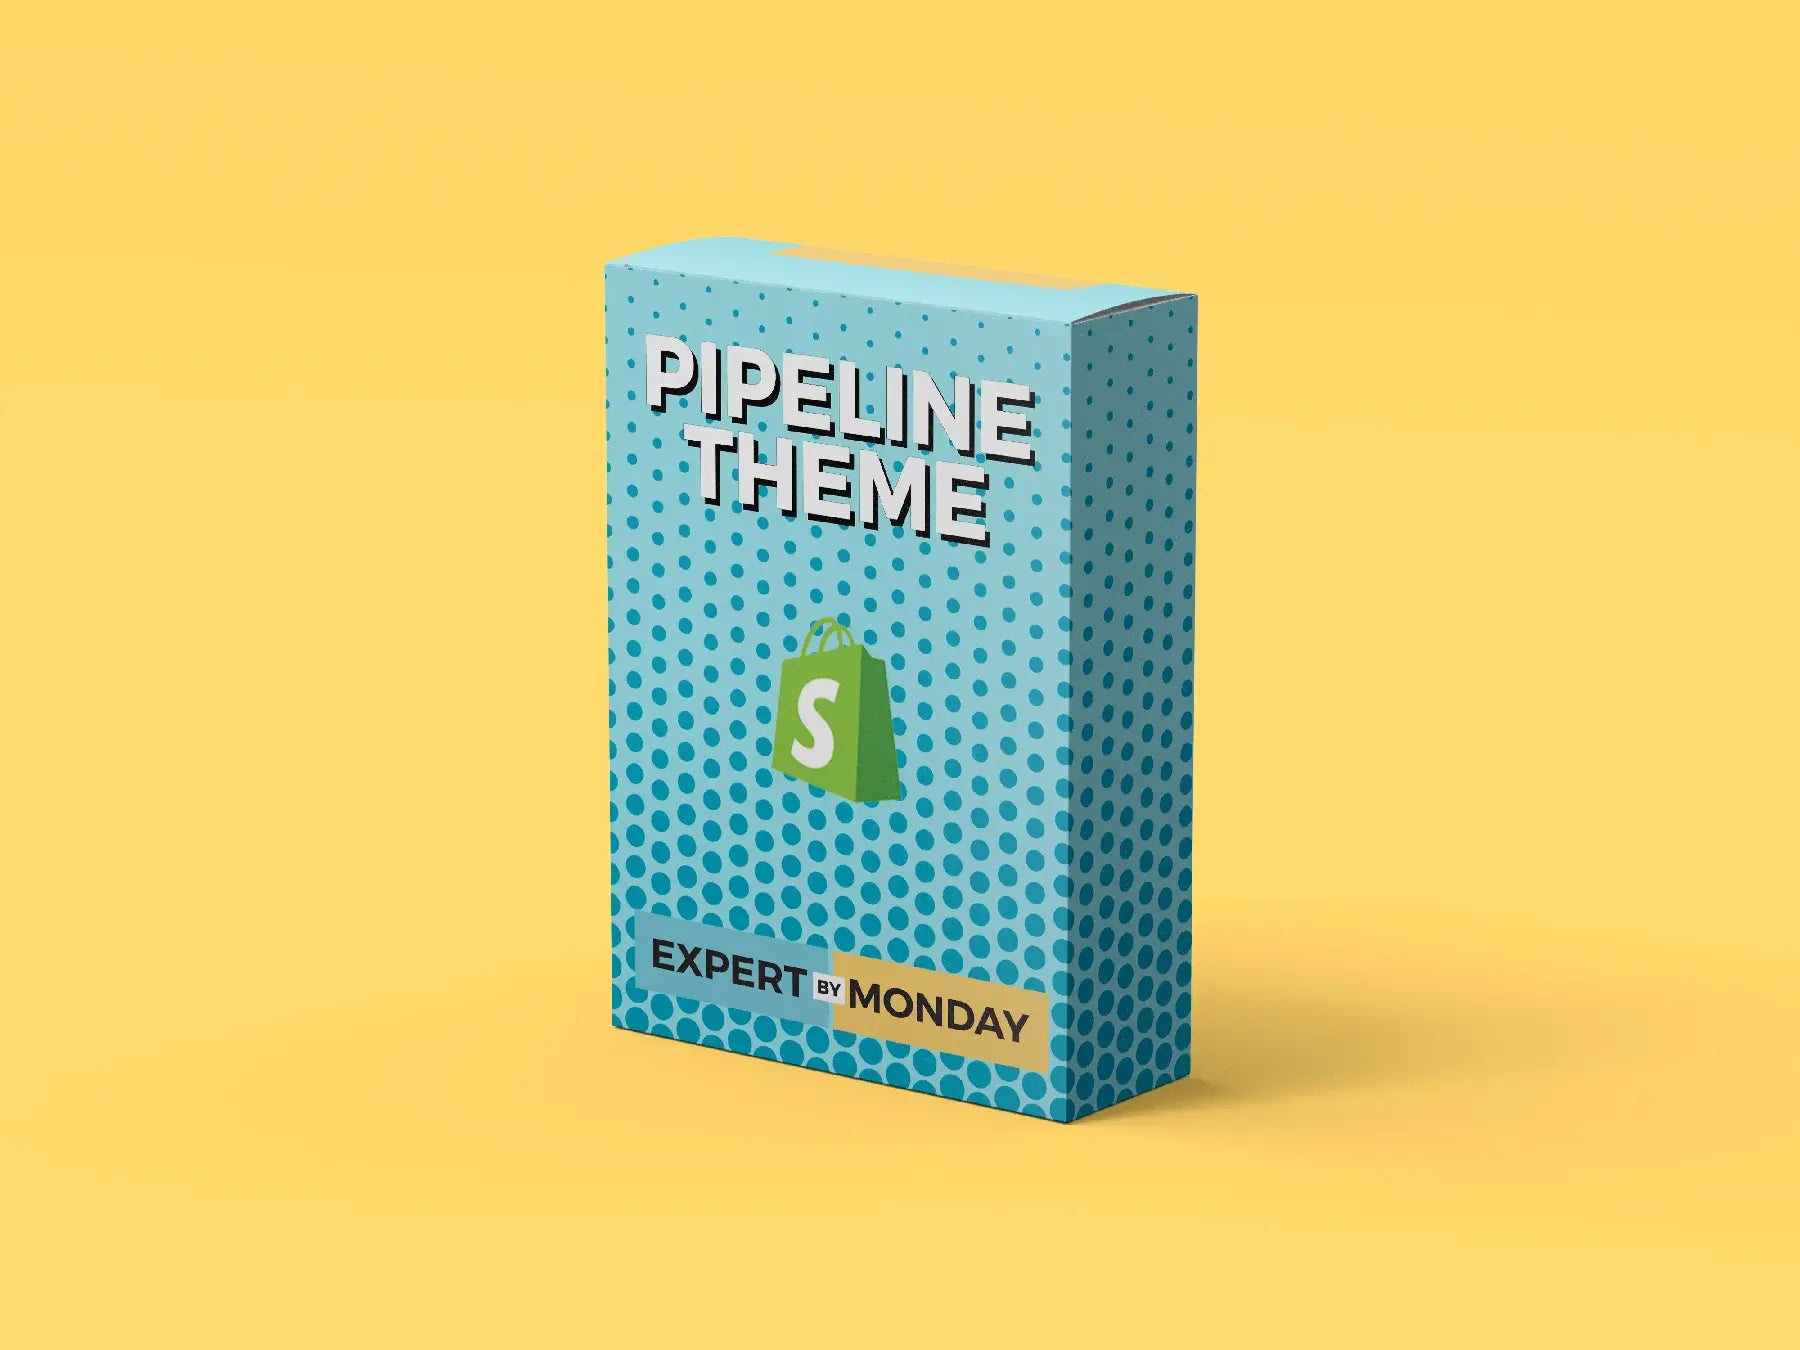 Expert by Monday - Pipeline Theme by Groupthought